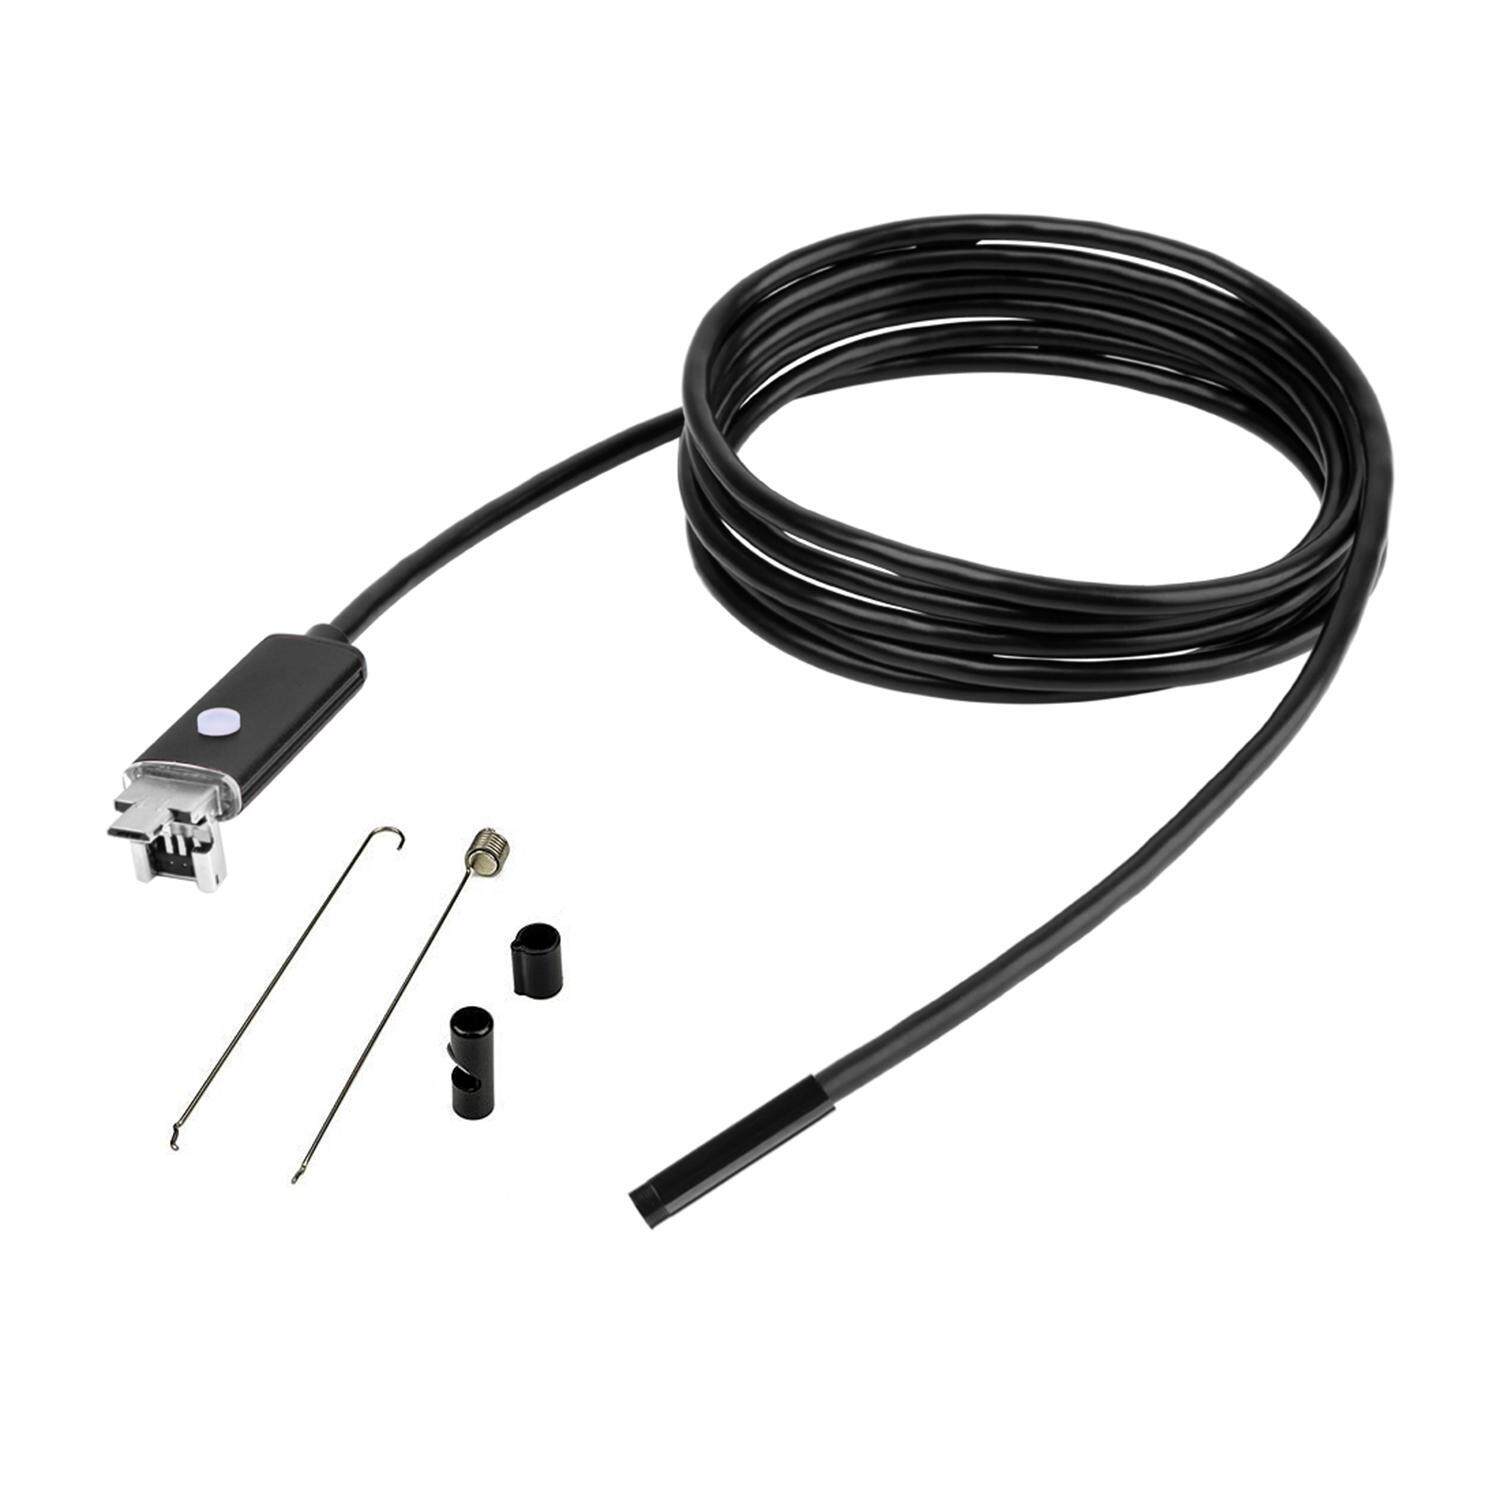 ouhofus USB Endoscope Borescope Inspection Camera Waterproof Snake Camera with 6 Adjustable Led Light for Android with OTG Micro USB and PC - 6.5FT (2 Meter) - intl